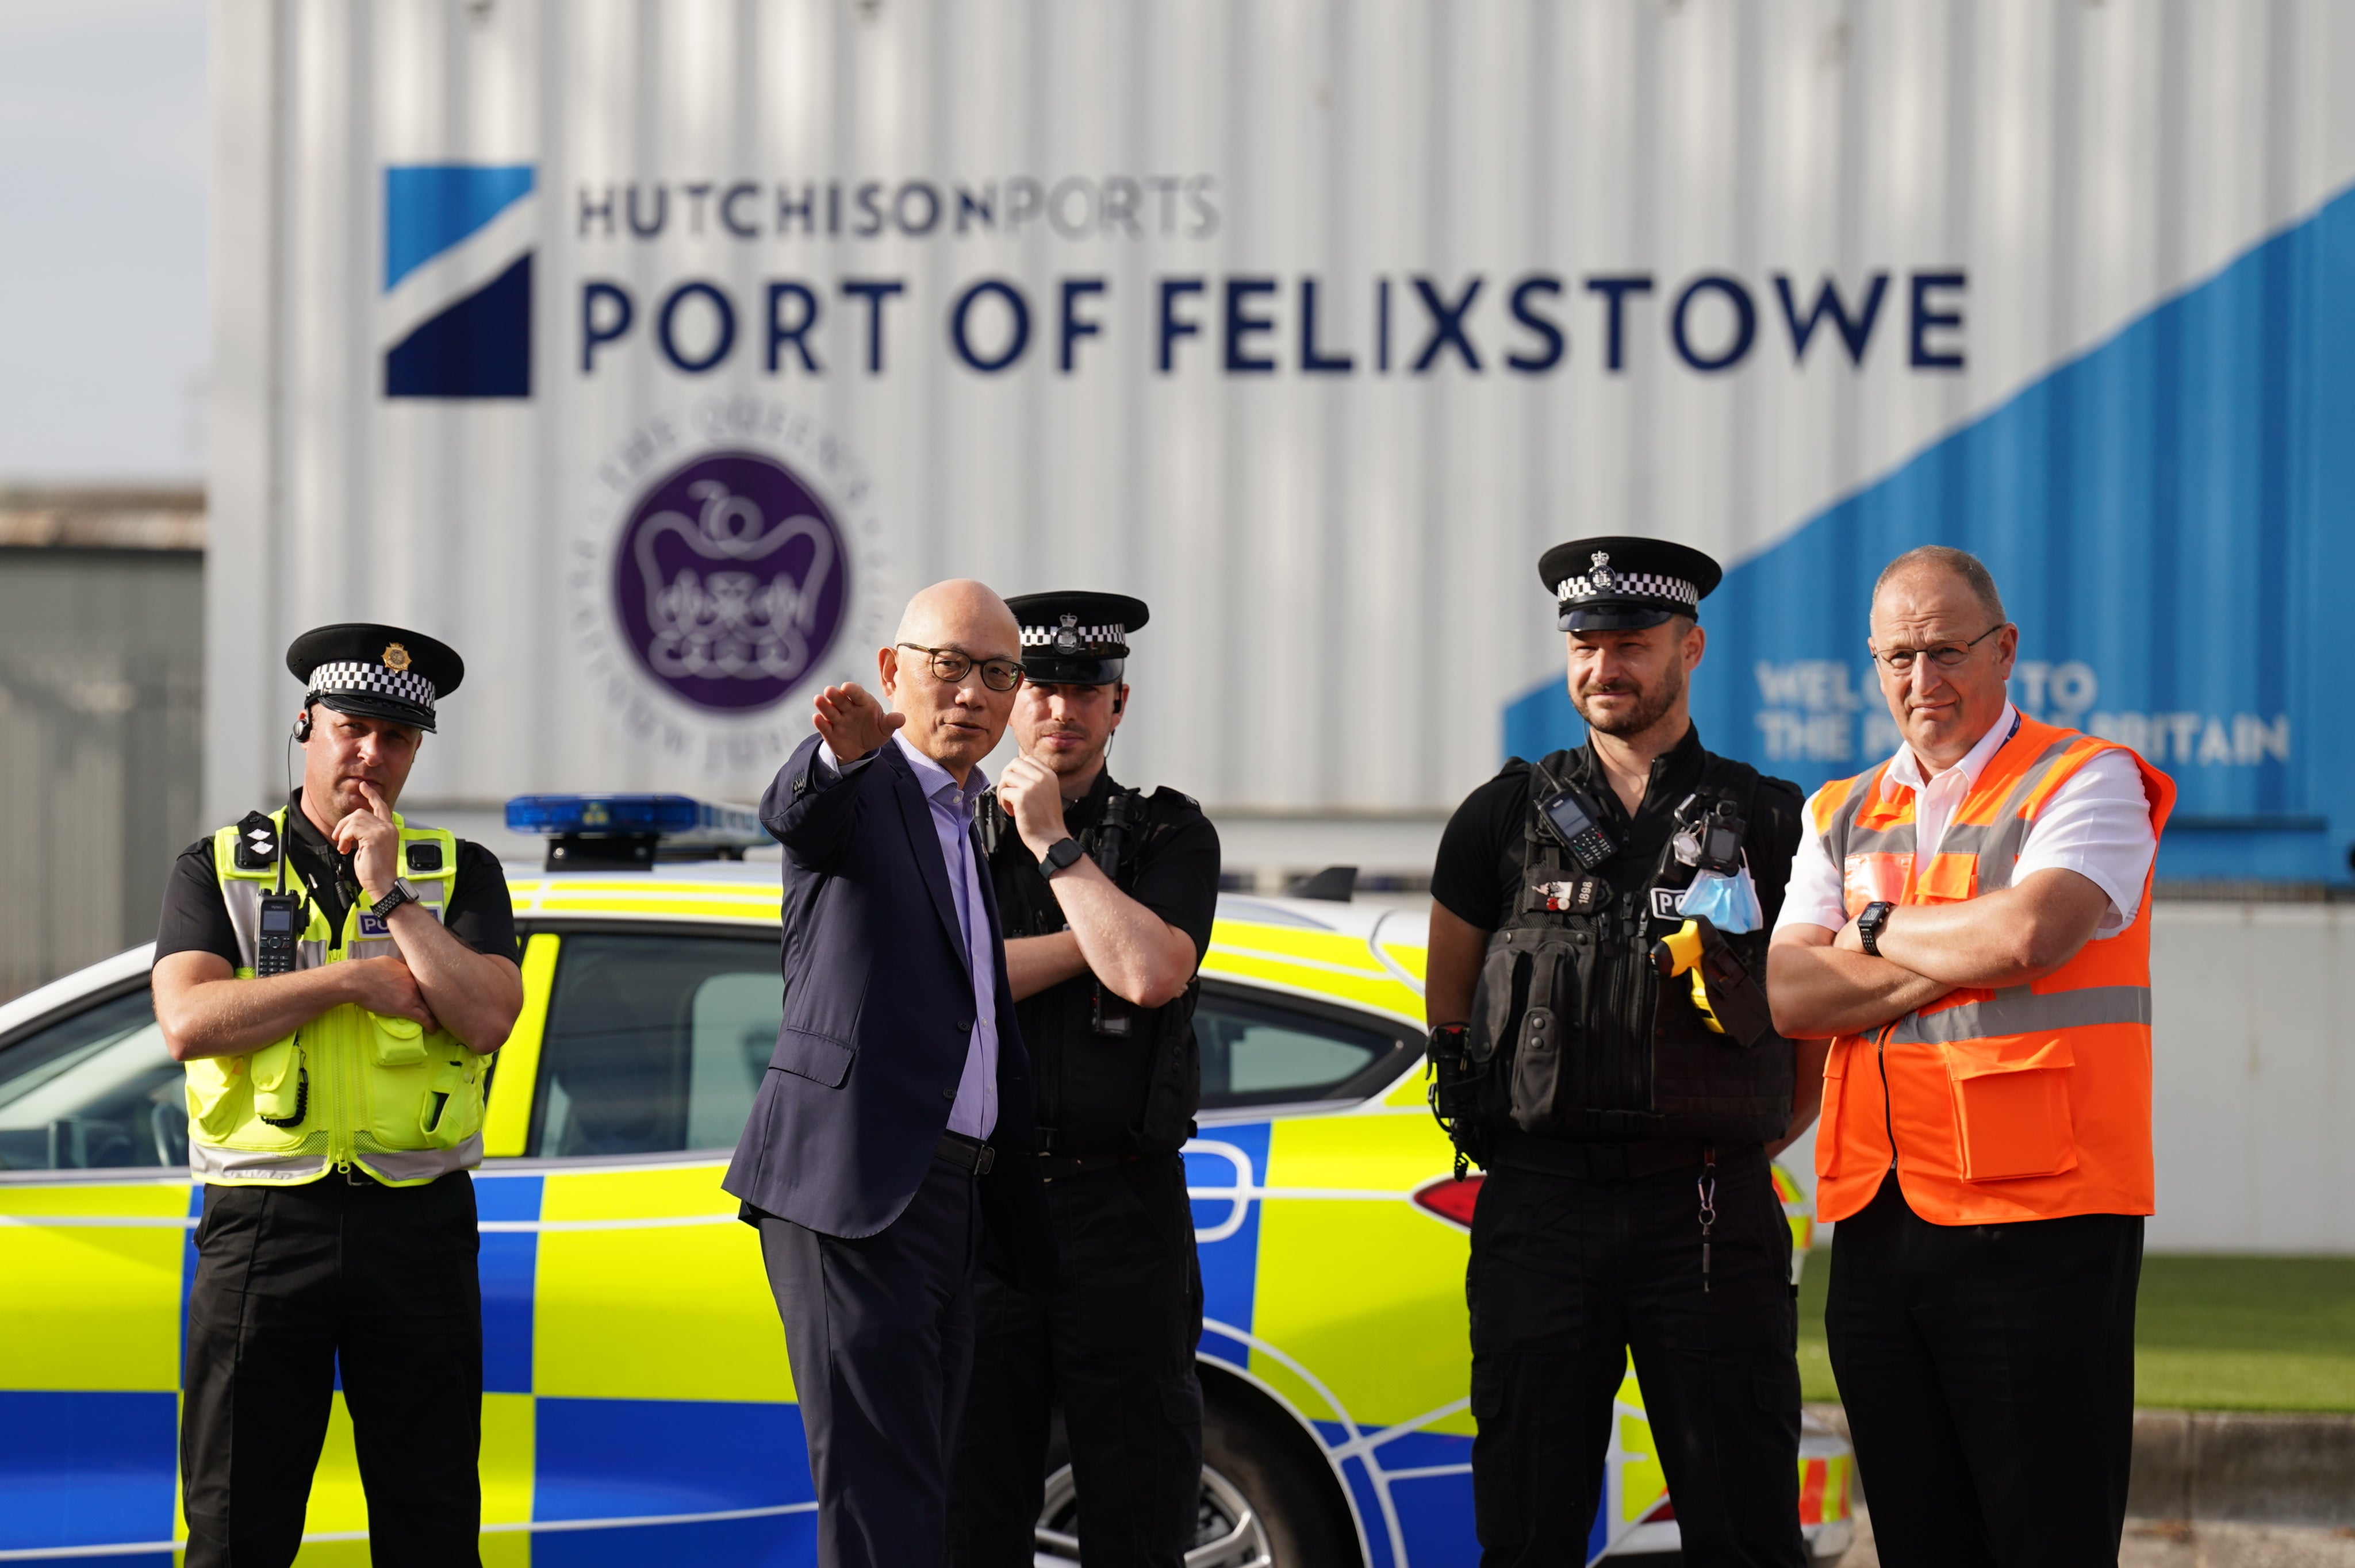 Hutchison Ports chief executive Clemence Cheng and police officers watch members of the Unite union man a picket line at one of the entrances to the Port of Felixstowe (Joe Giddens/PA)